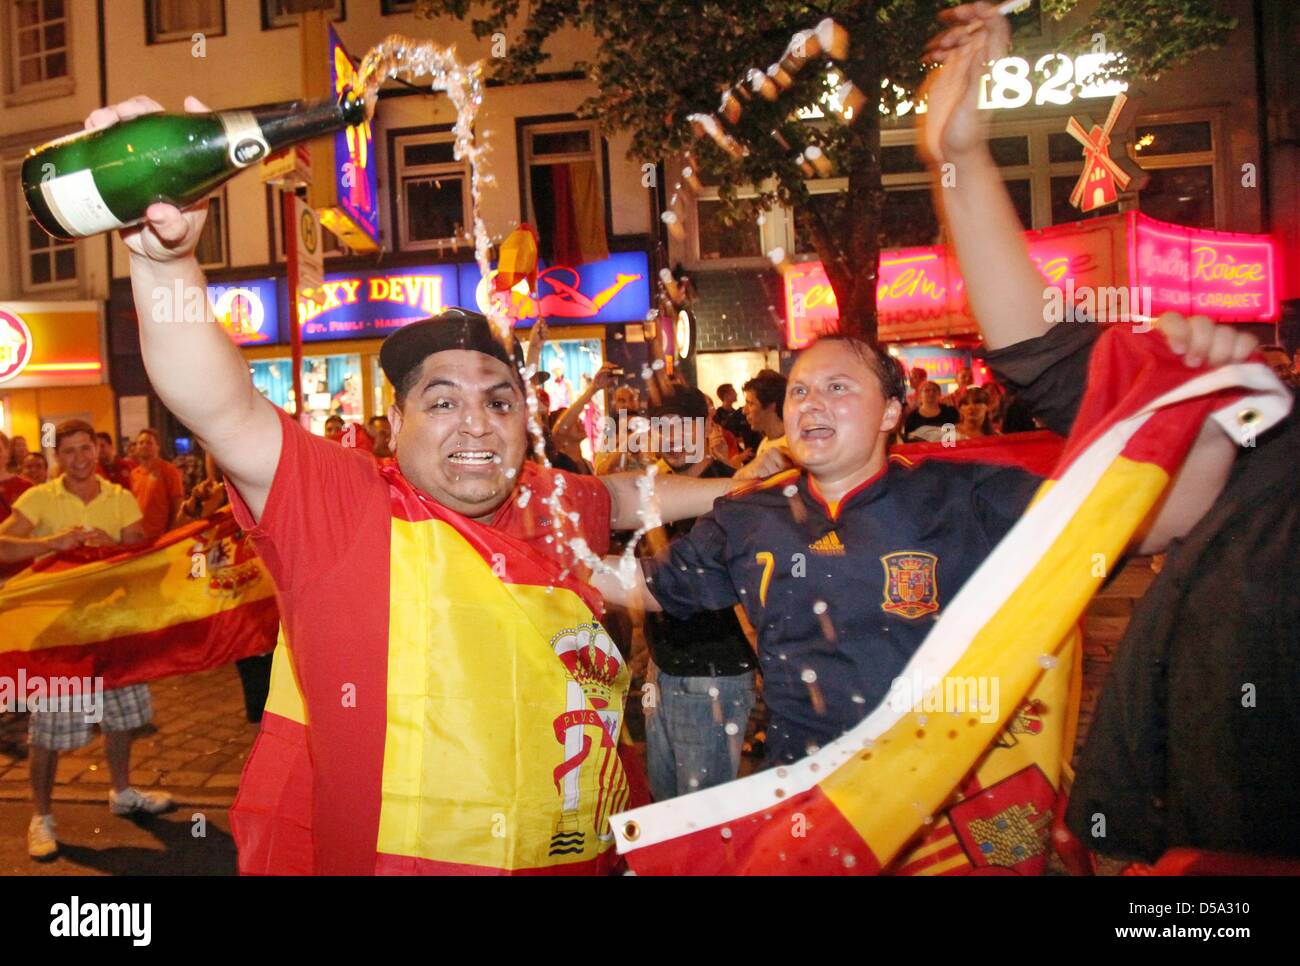 Spanish soccer fans celebrate the victory of their team on the Reeperbahn in Hamburg, Germany, 11 July 2010. Spain won the final match of the FIFA World Cup 2010 in South Africa against the Netherlands with the score 1-0. Photo: Bodo Marks Stock Photo